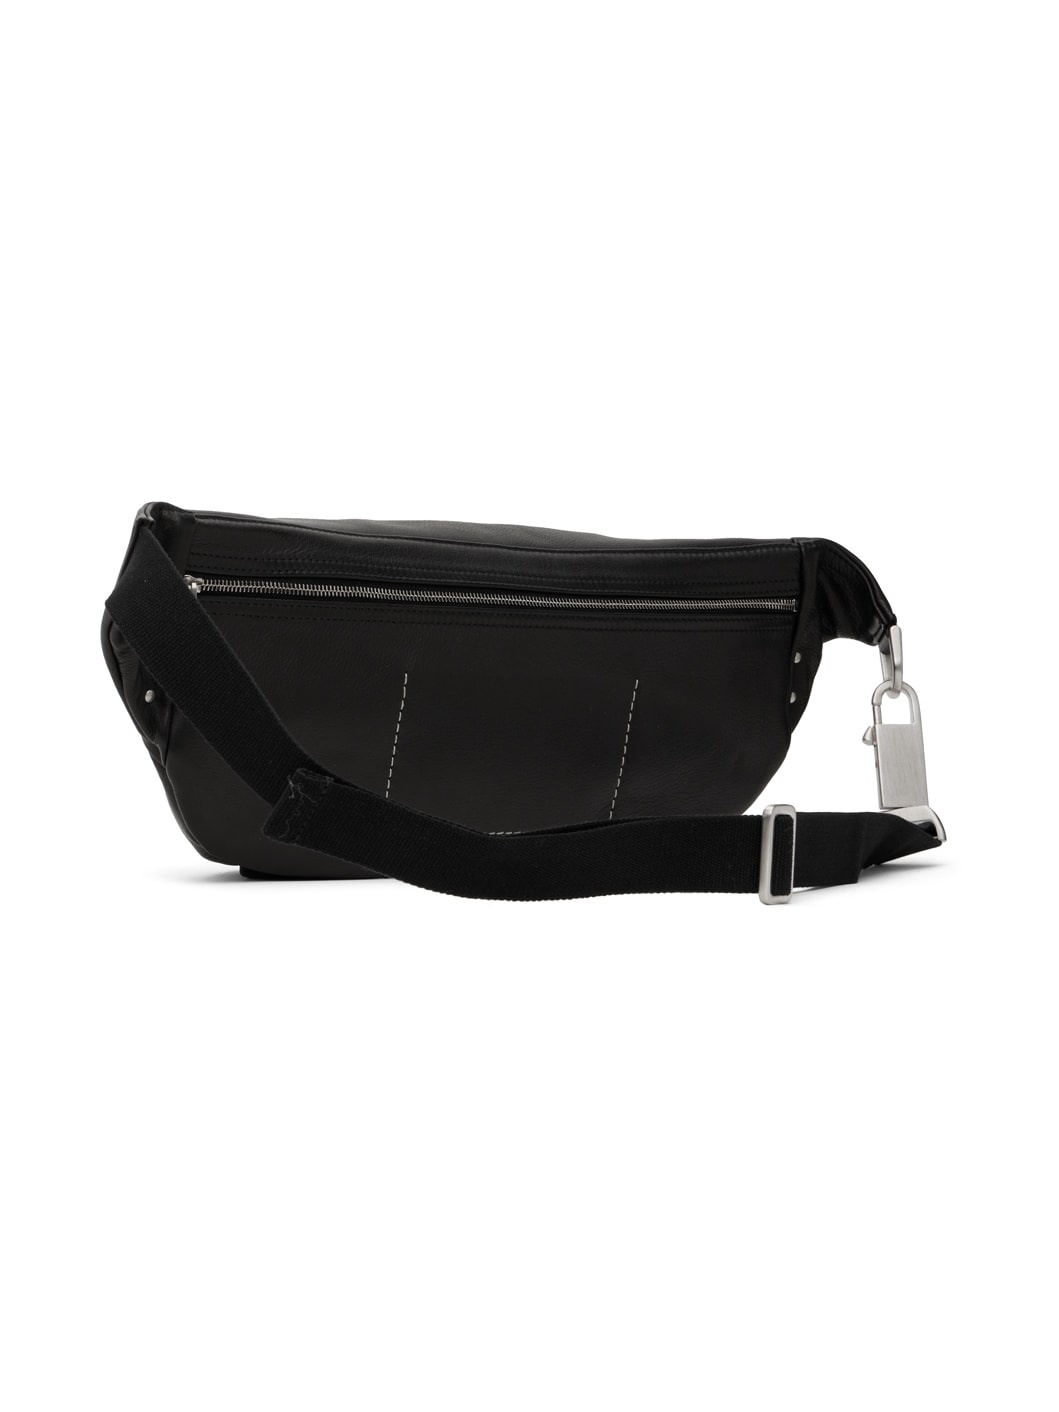 Black Leather Pouch - 3